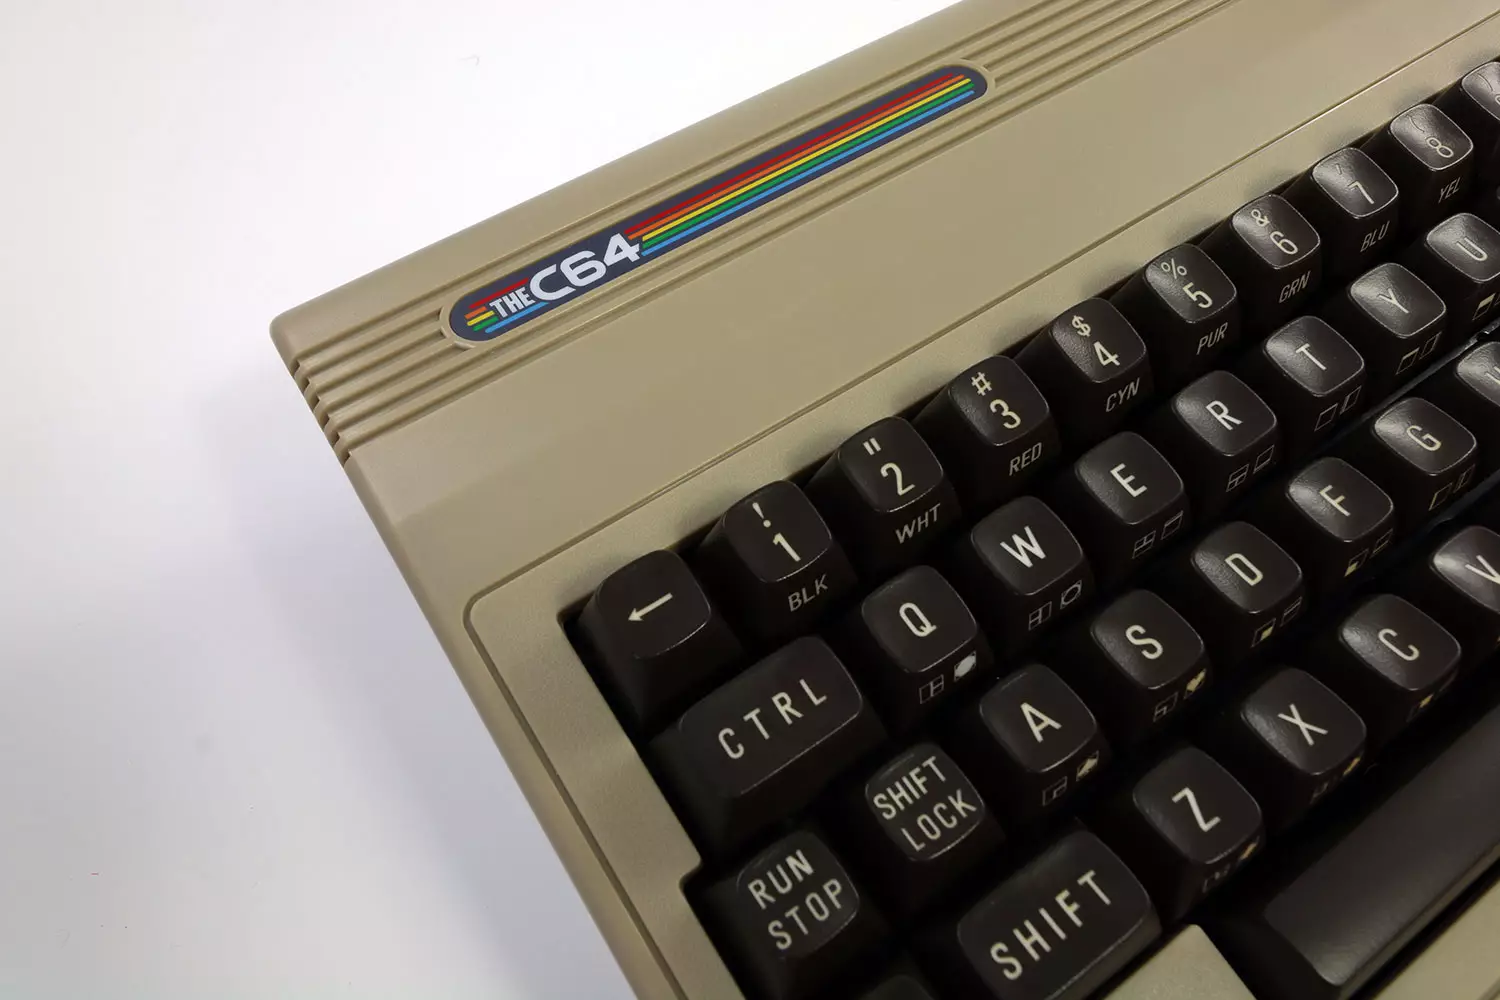 The C64 certainly looks the part